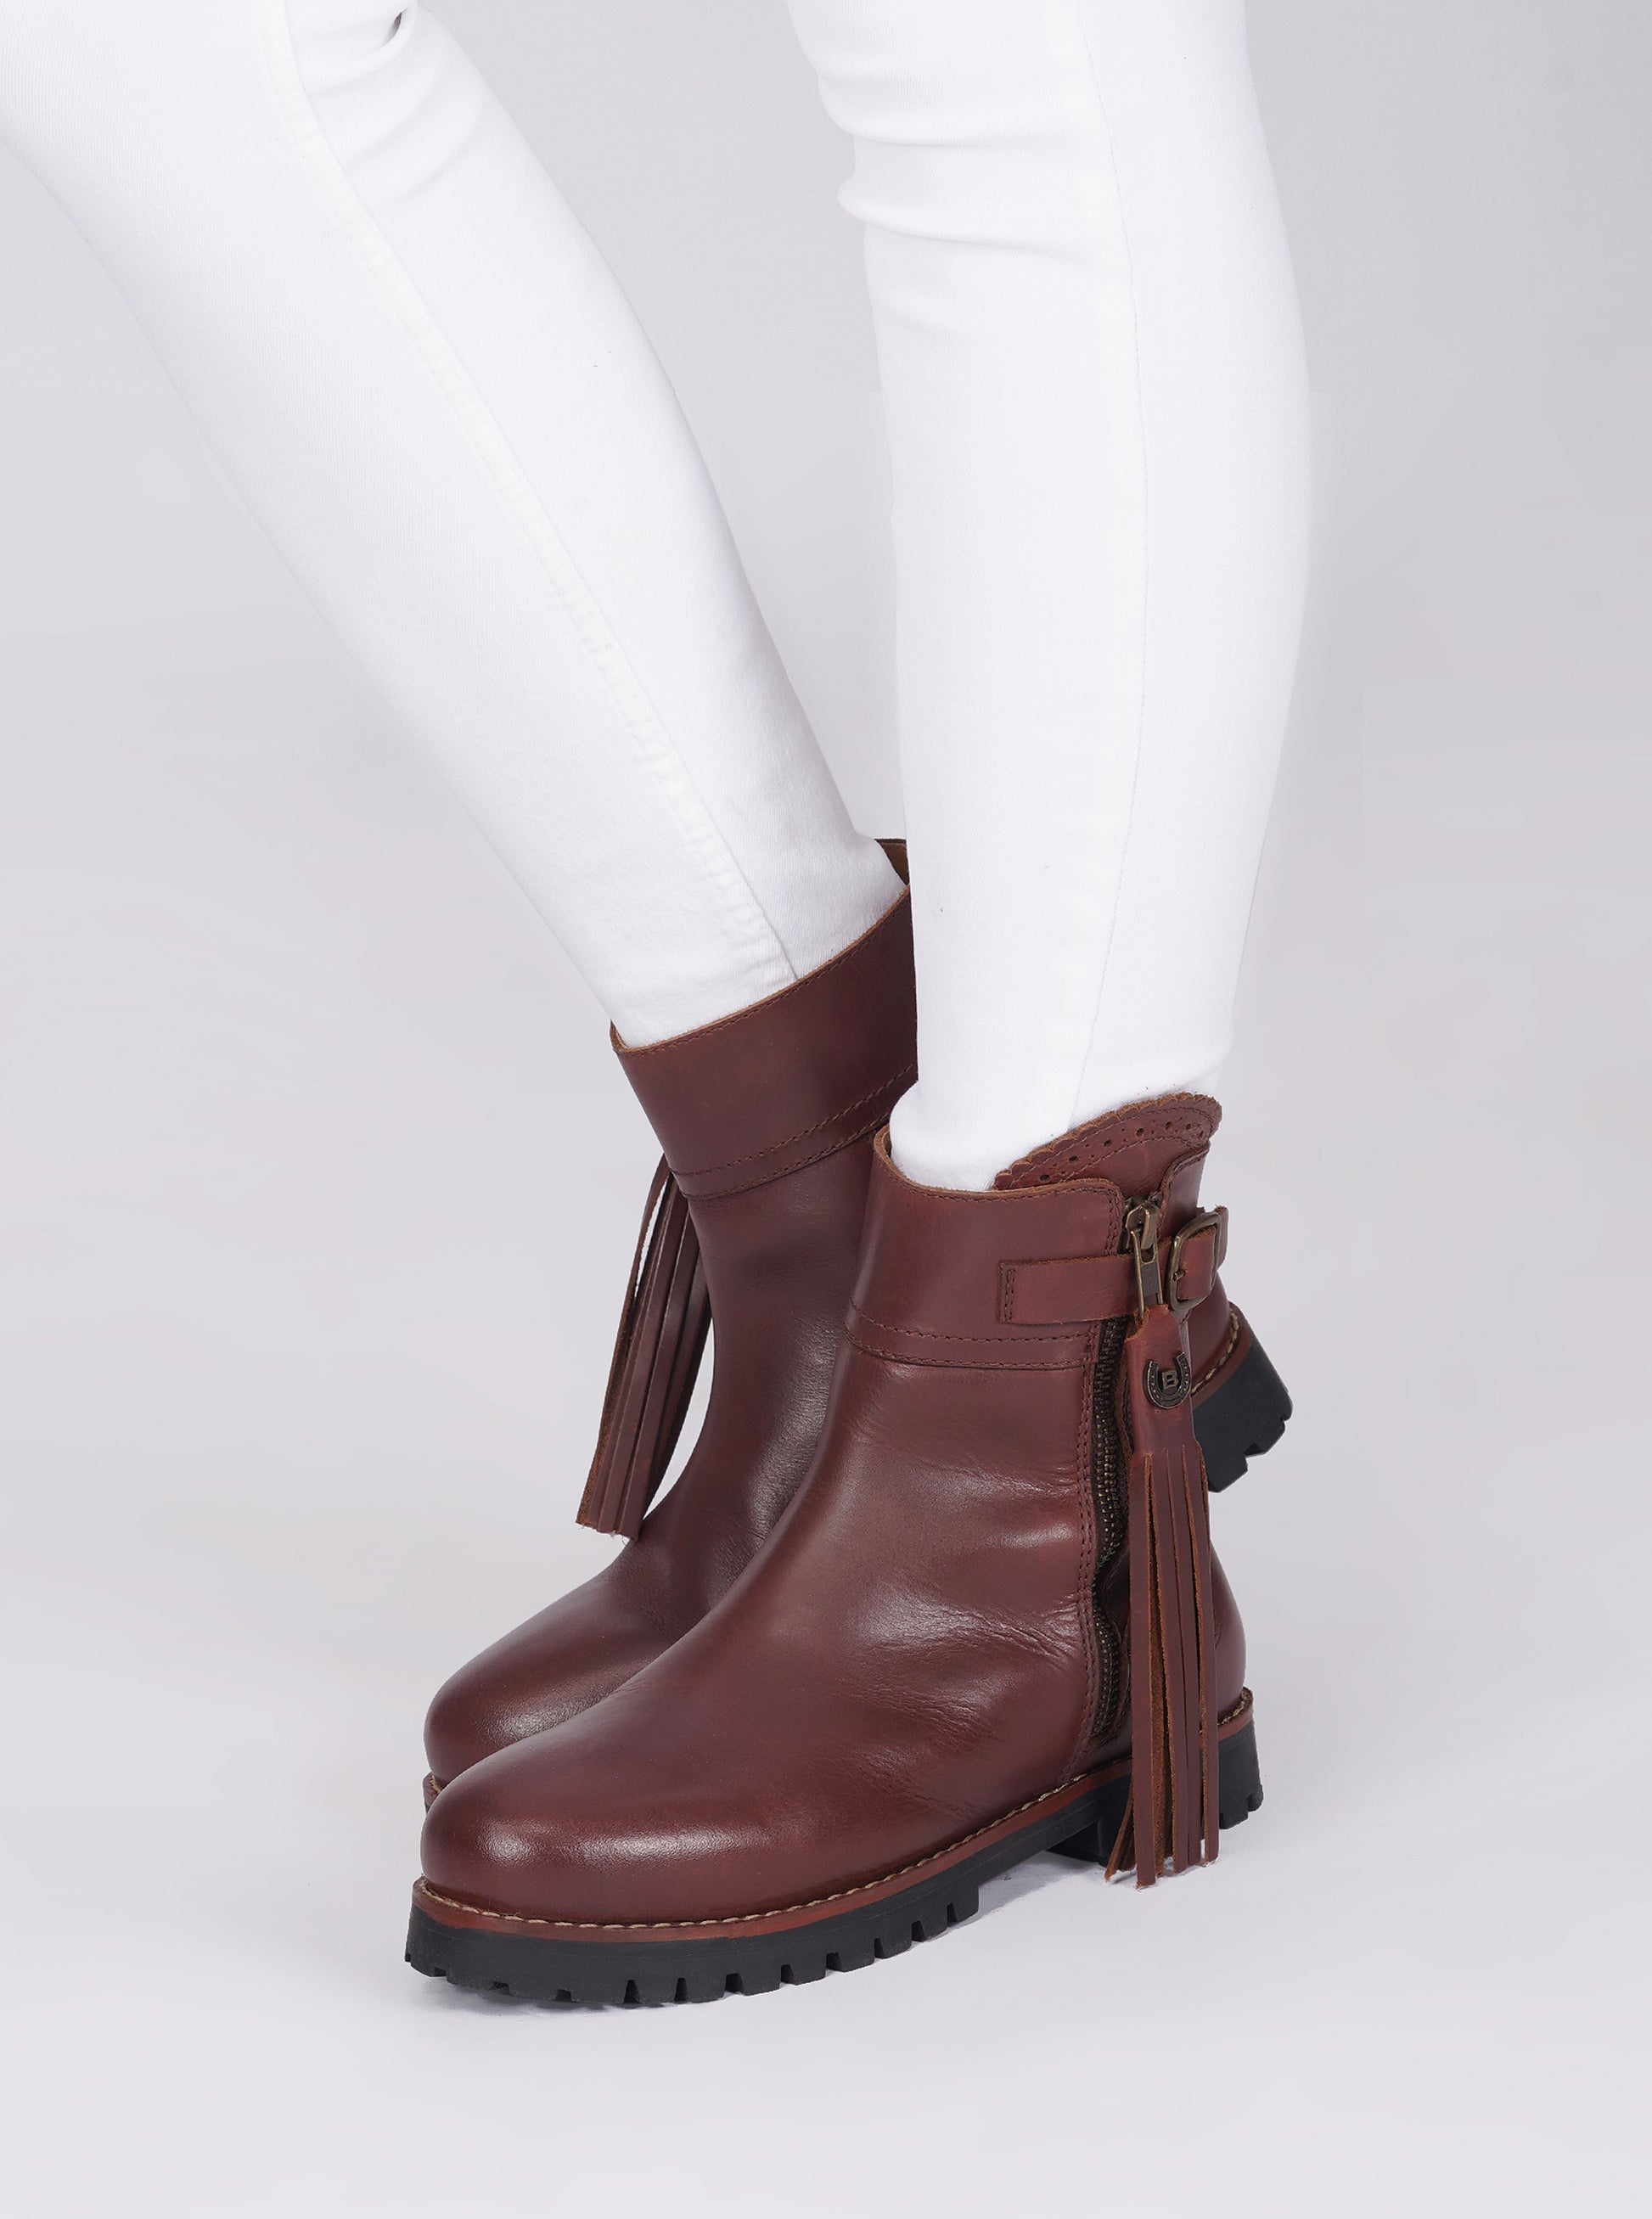 Denali, ankle riding boots.